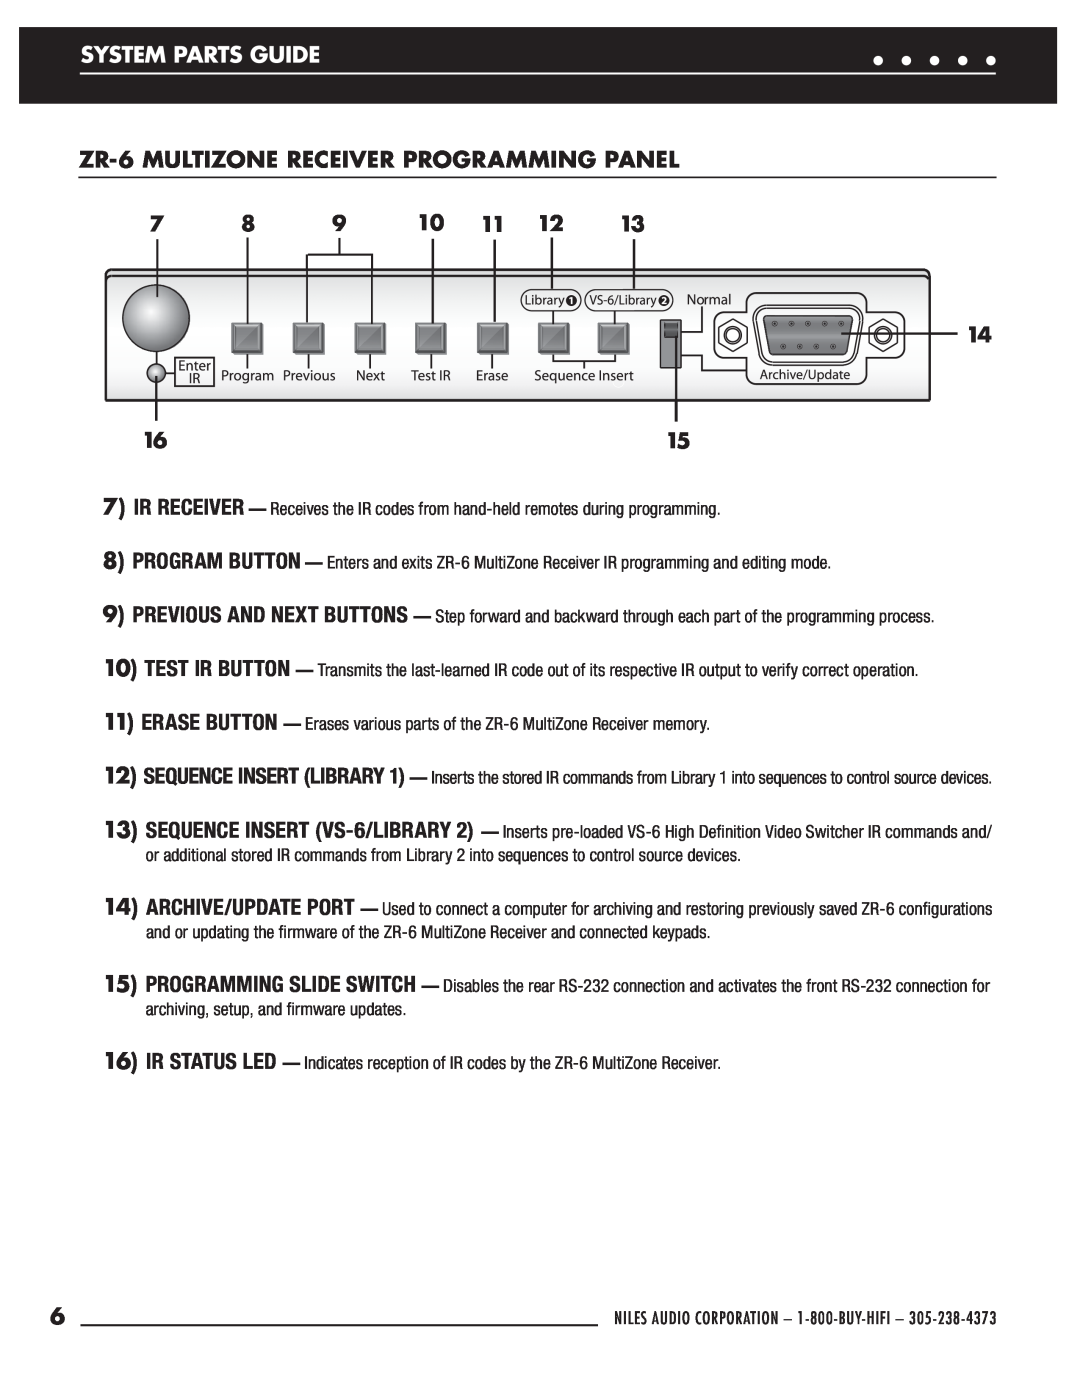 Niles Audio manual ZR-6MULTIZONE RECEIVER PROGRAMMING PANEL, System Parts Guide 